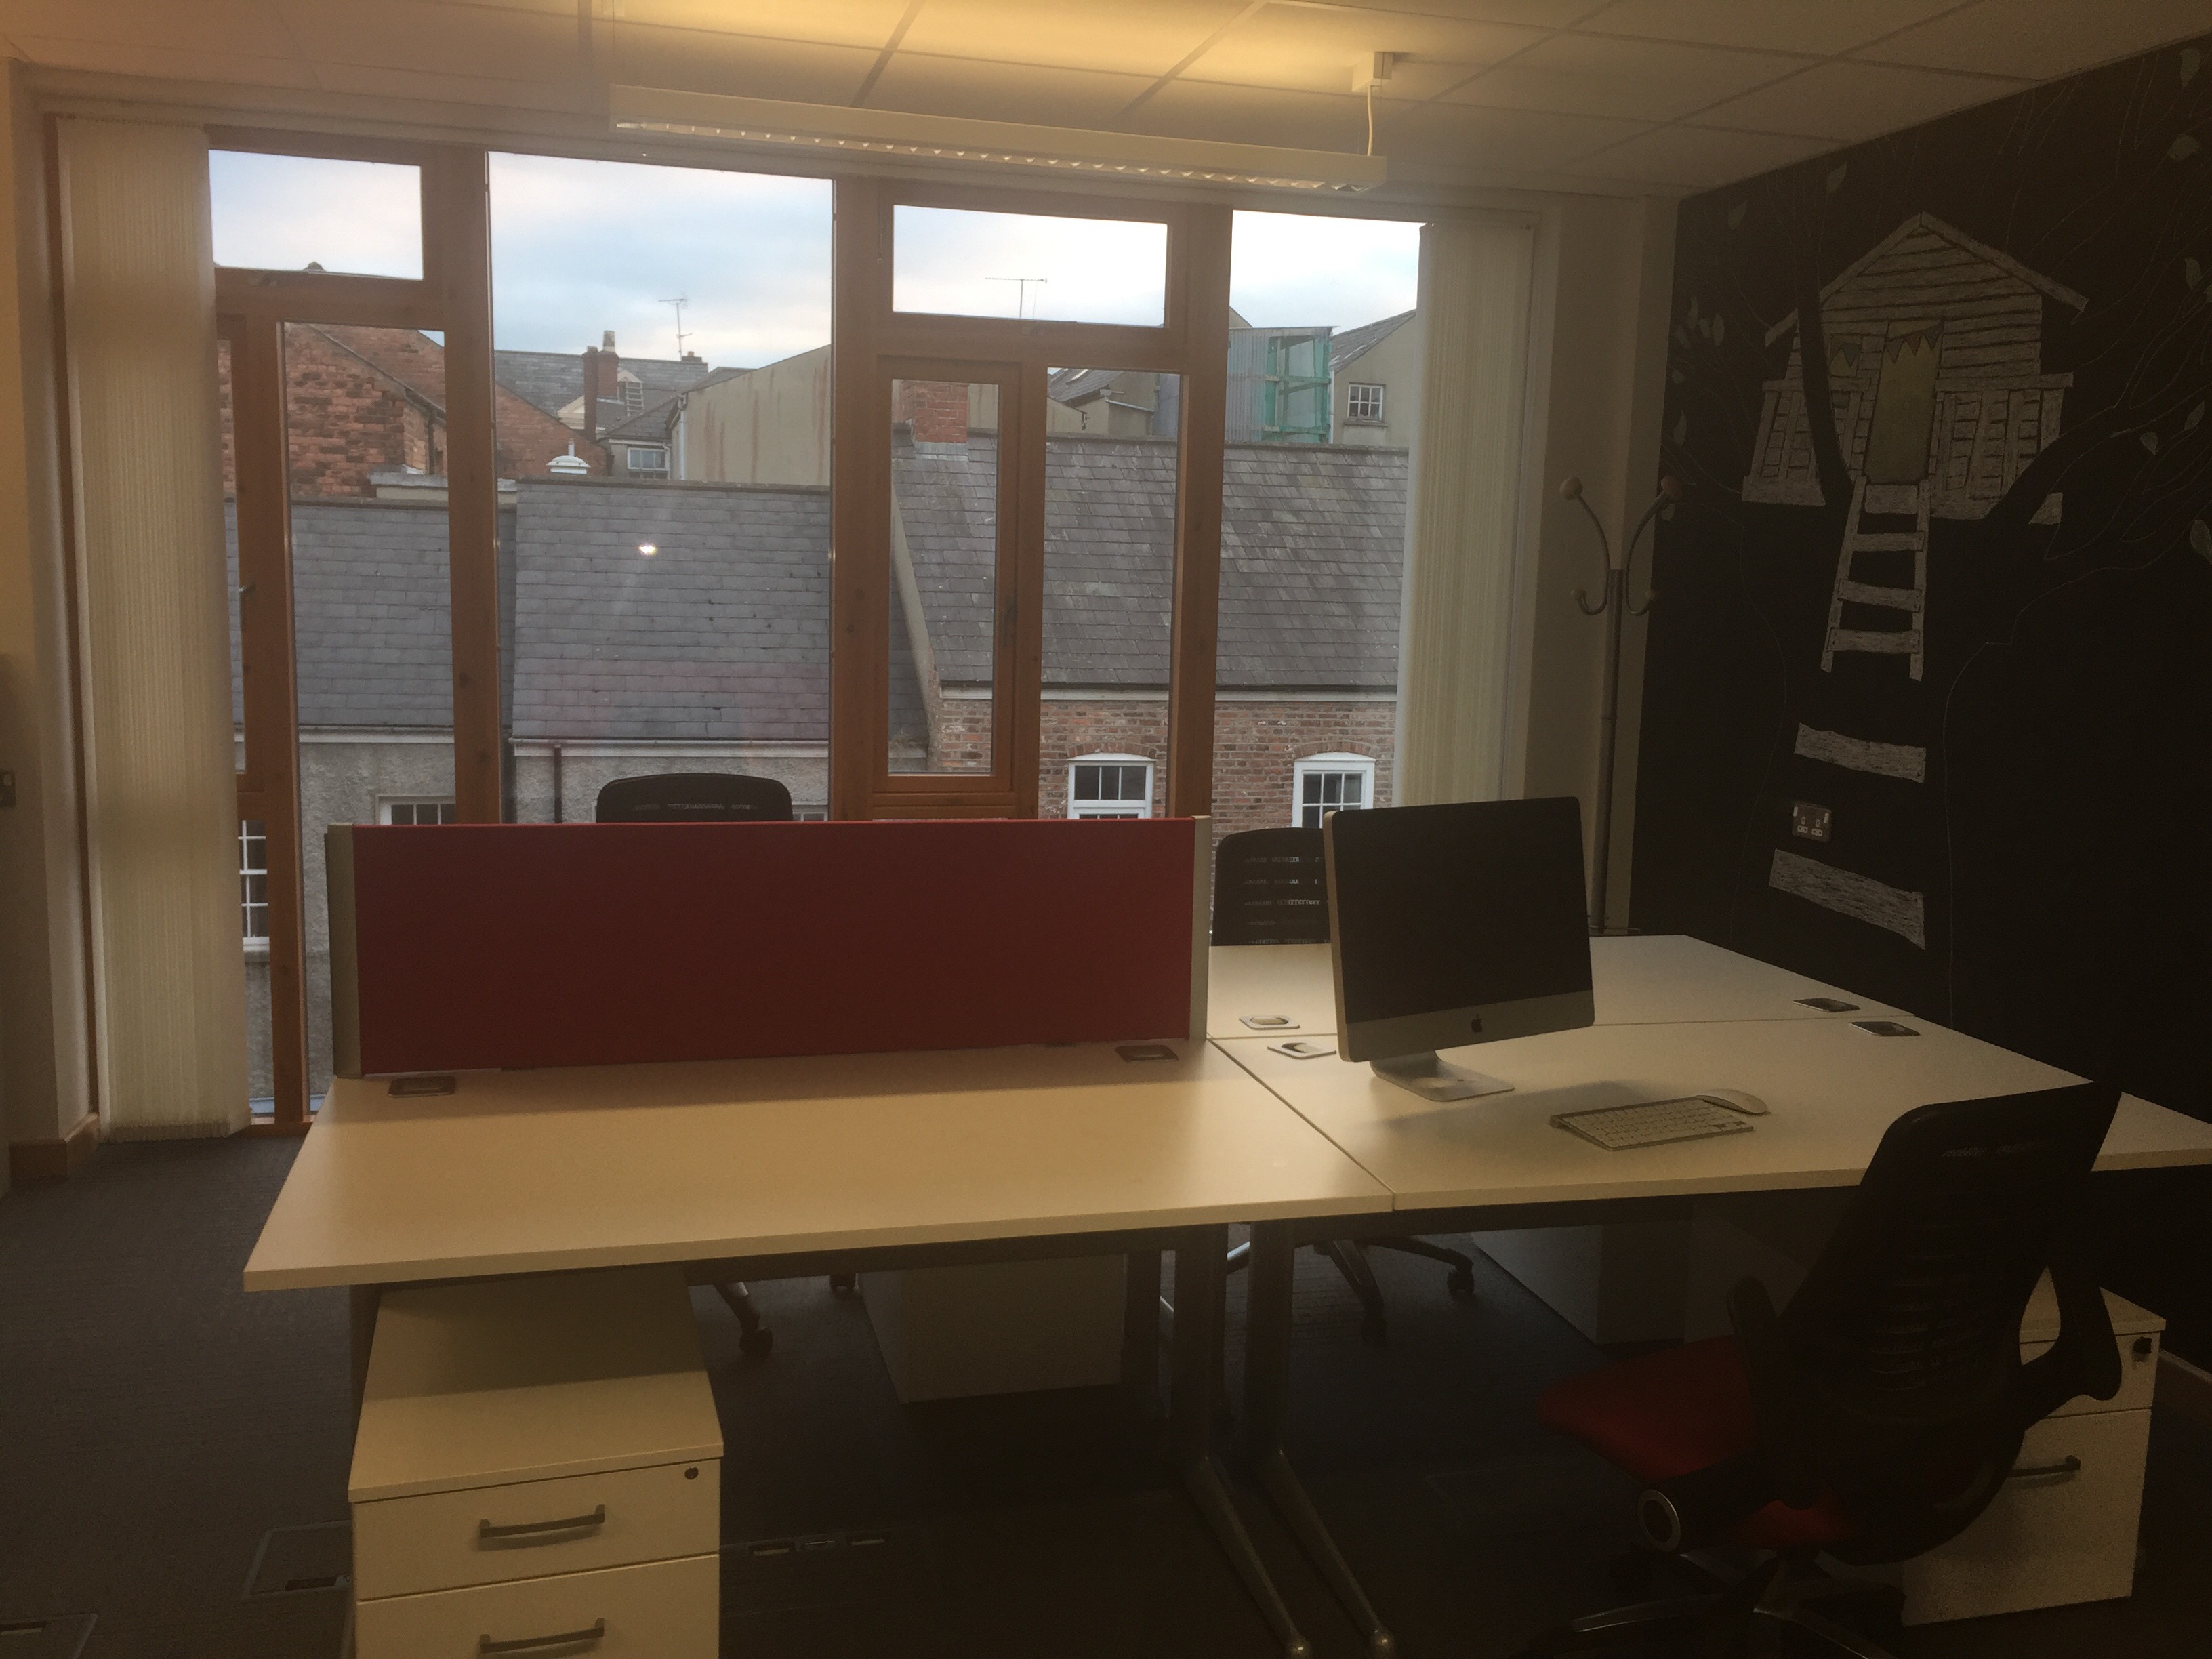 Desks for rent in Holywell DiverseCity Community Partnership